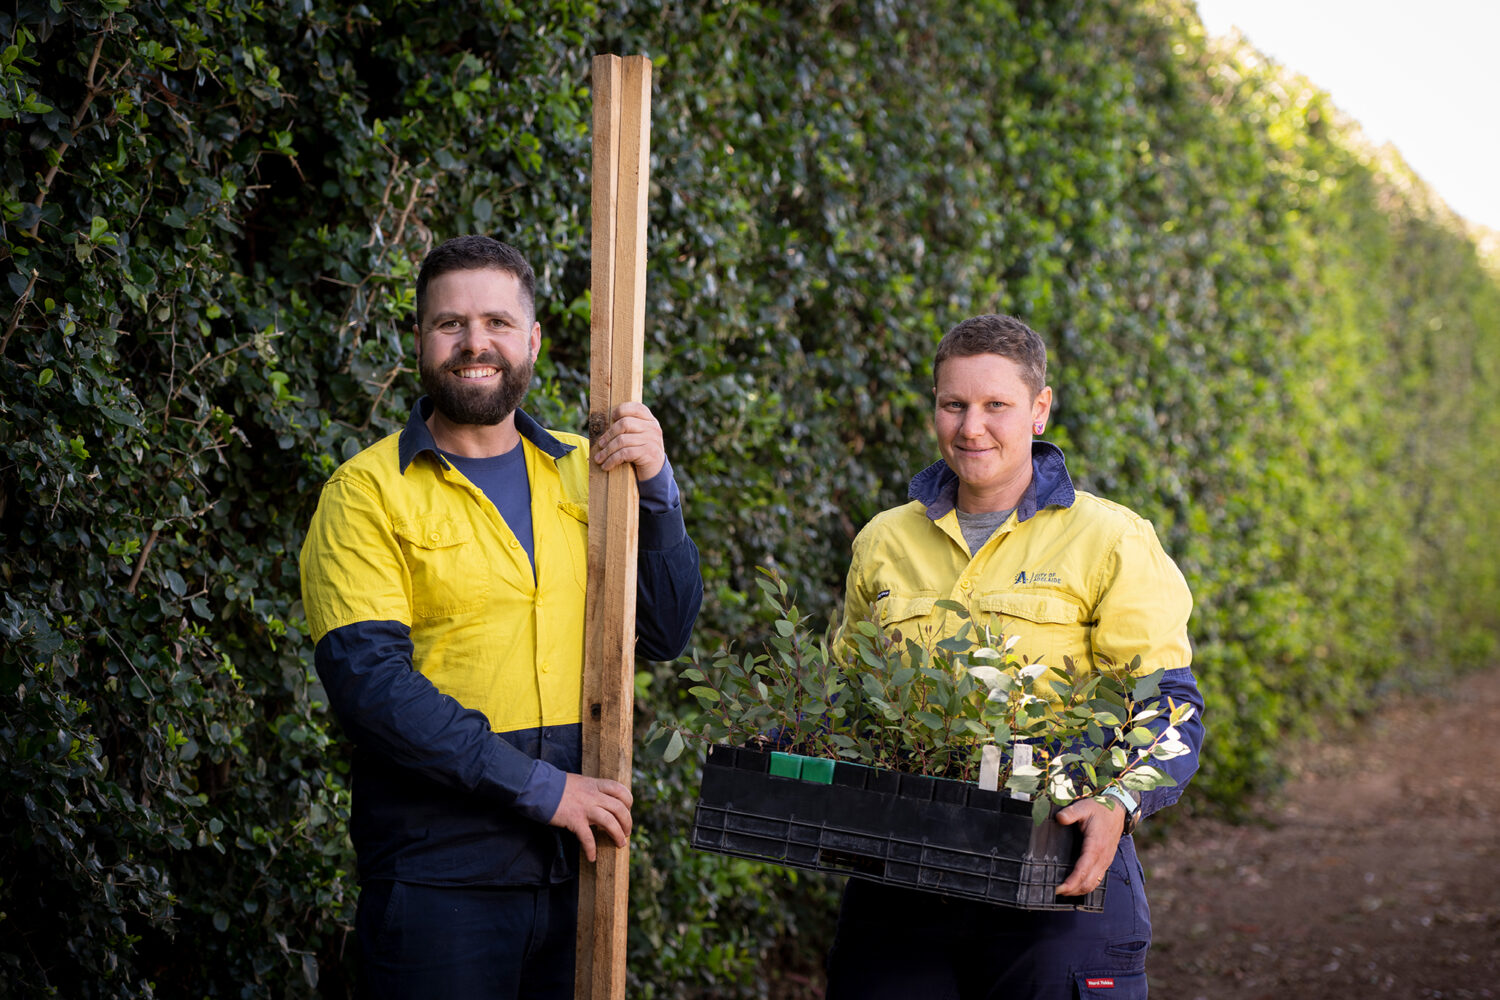 alt="man and woman with tools stand in front City of Adelaide hedge"